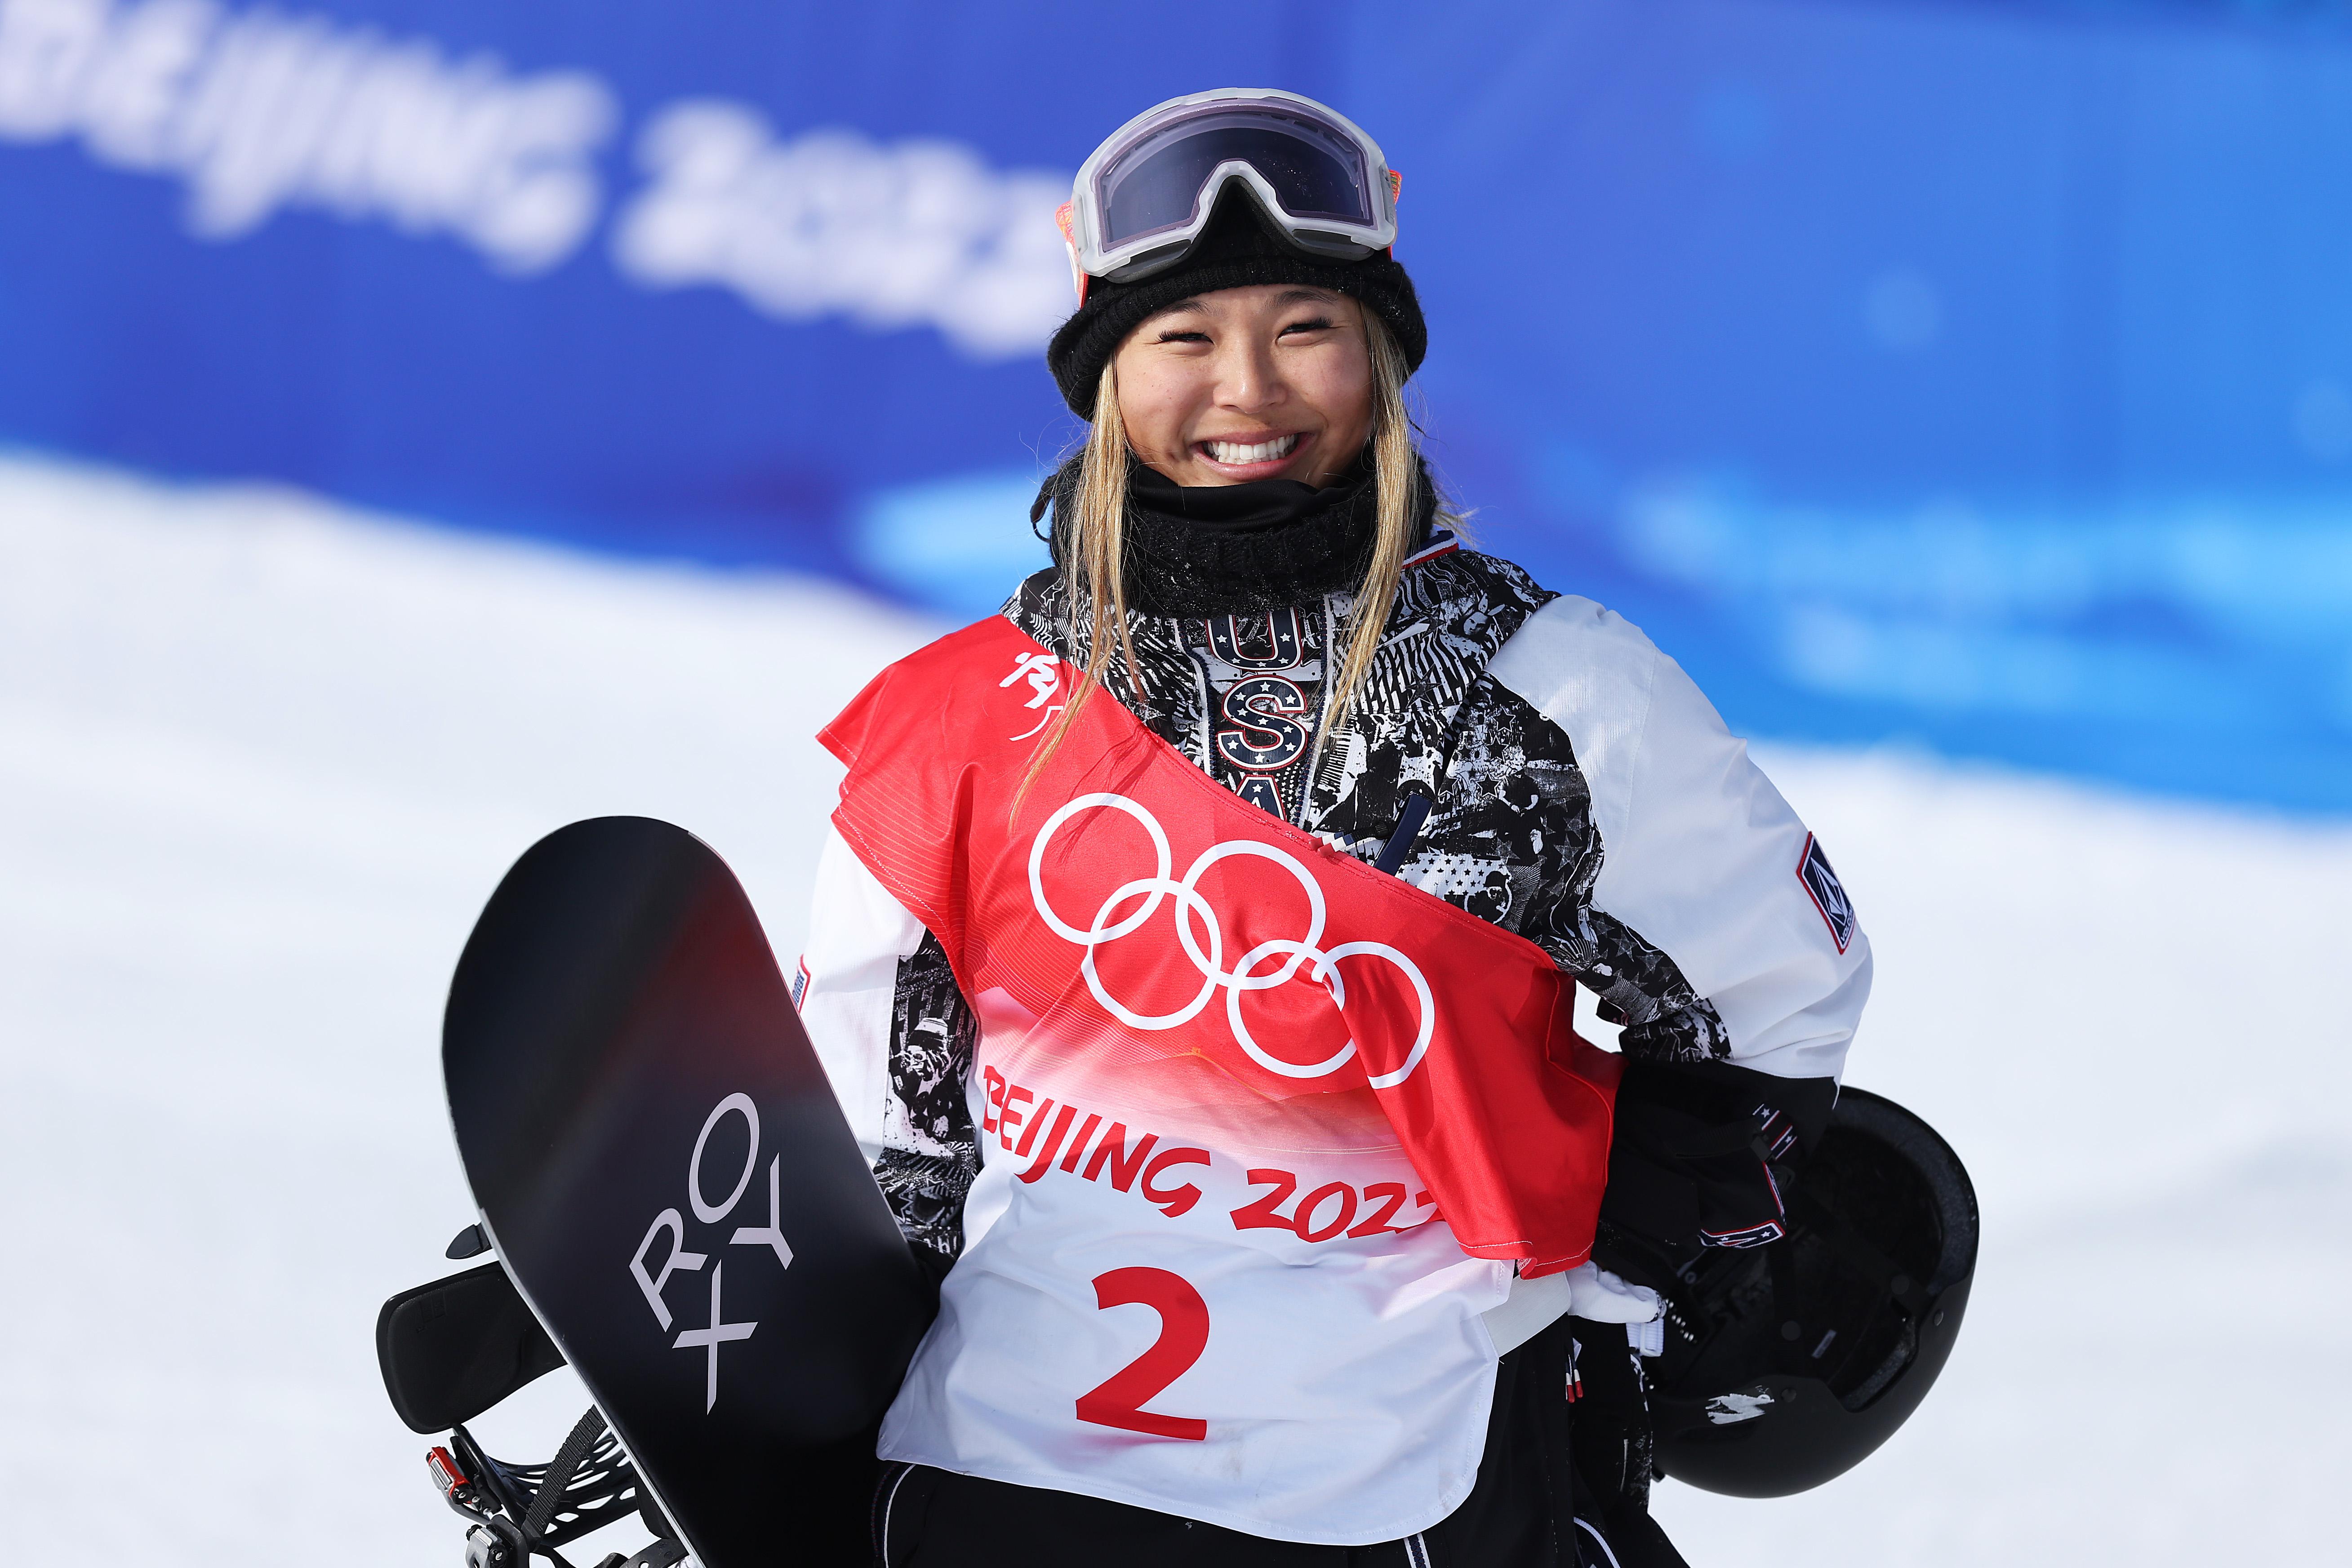 Chloe Kim, smiling and holding her snowboard